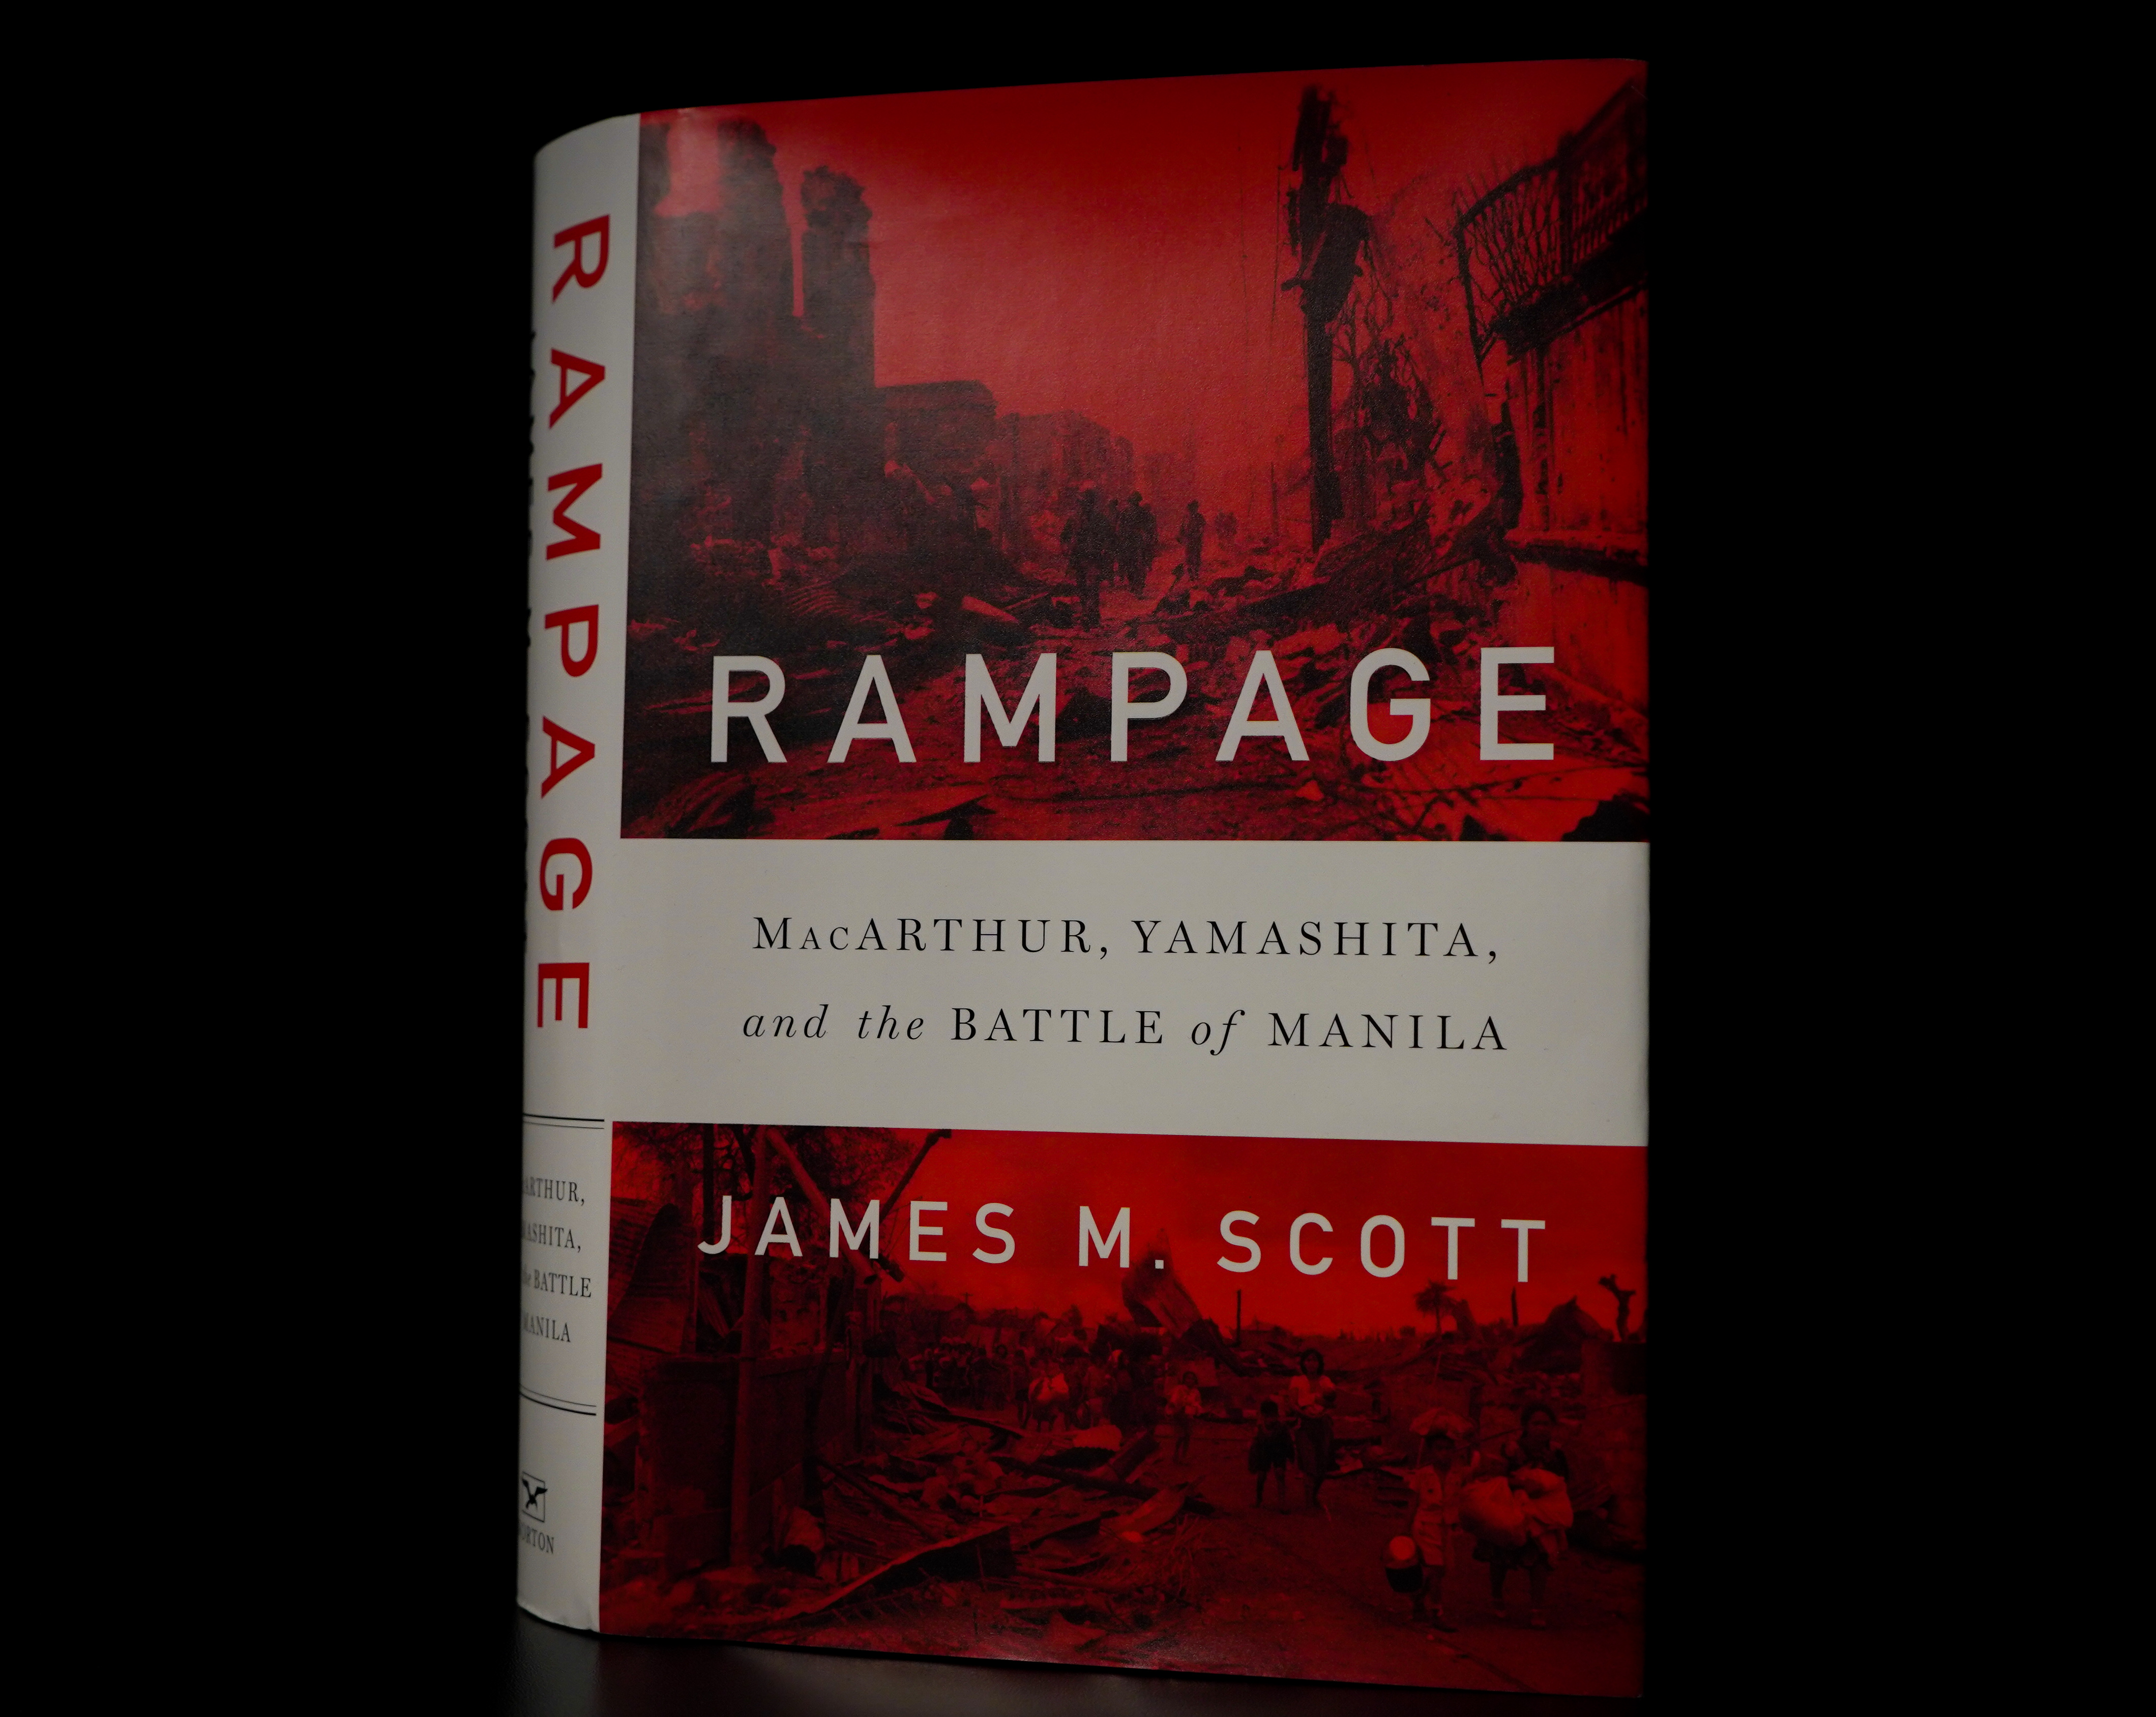 Manila 1945 The Destruction Of The Pearl Of The Orient A Review Of Rampage Macarthur Yamashita And The Battle Of Manila The National Wwii Museum New Orleans